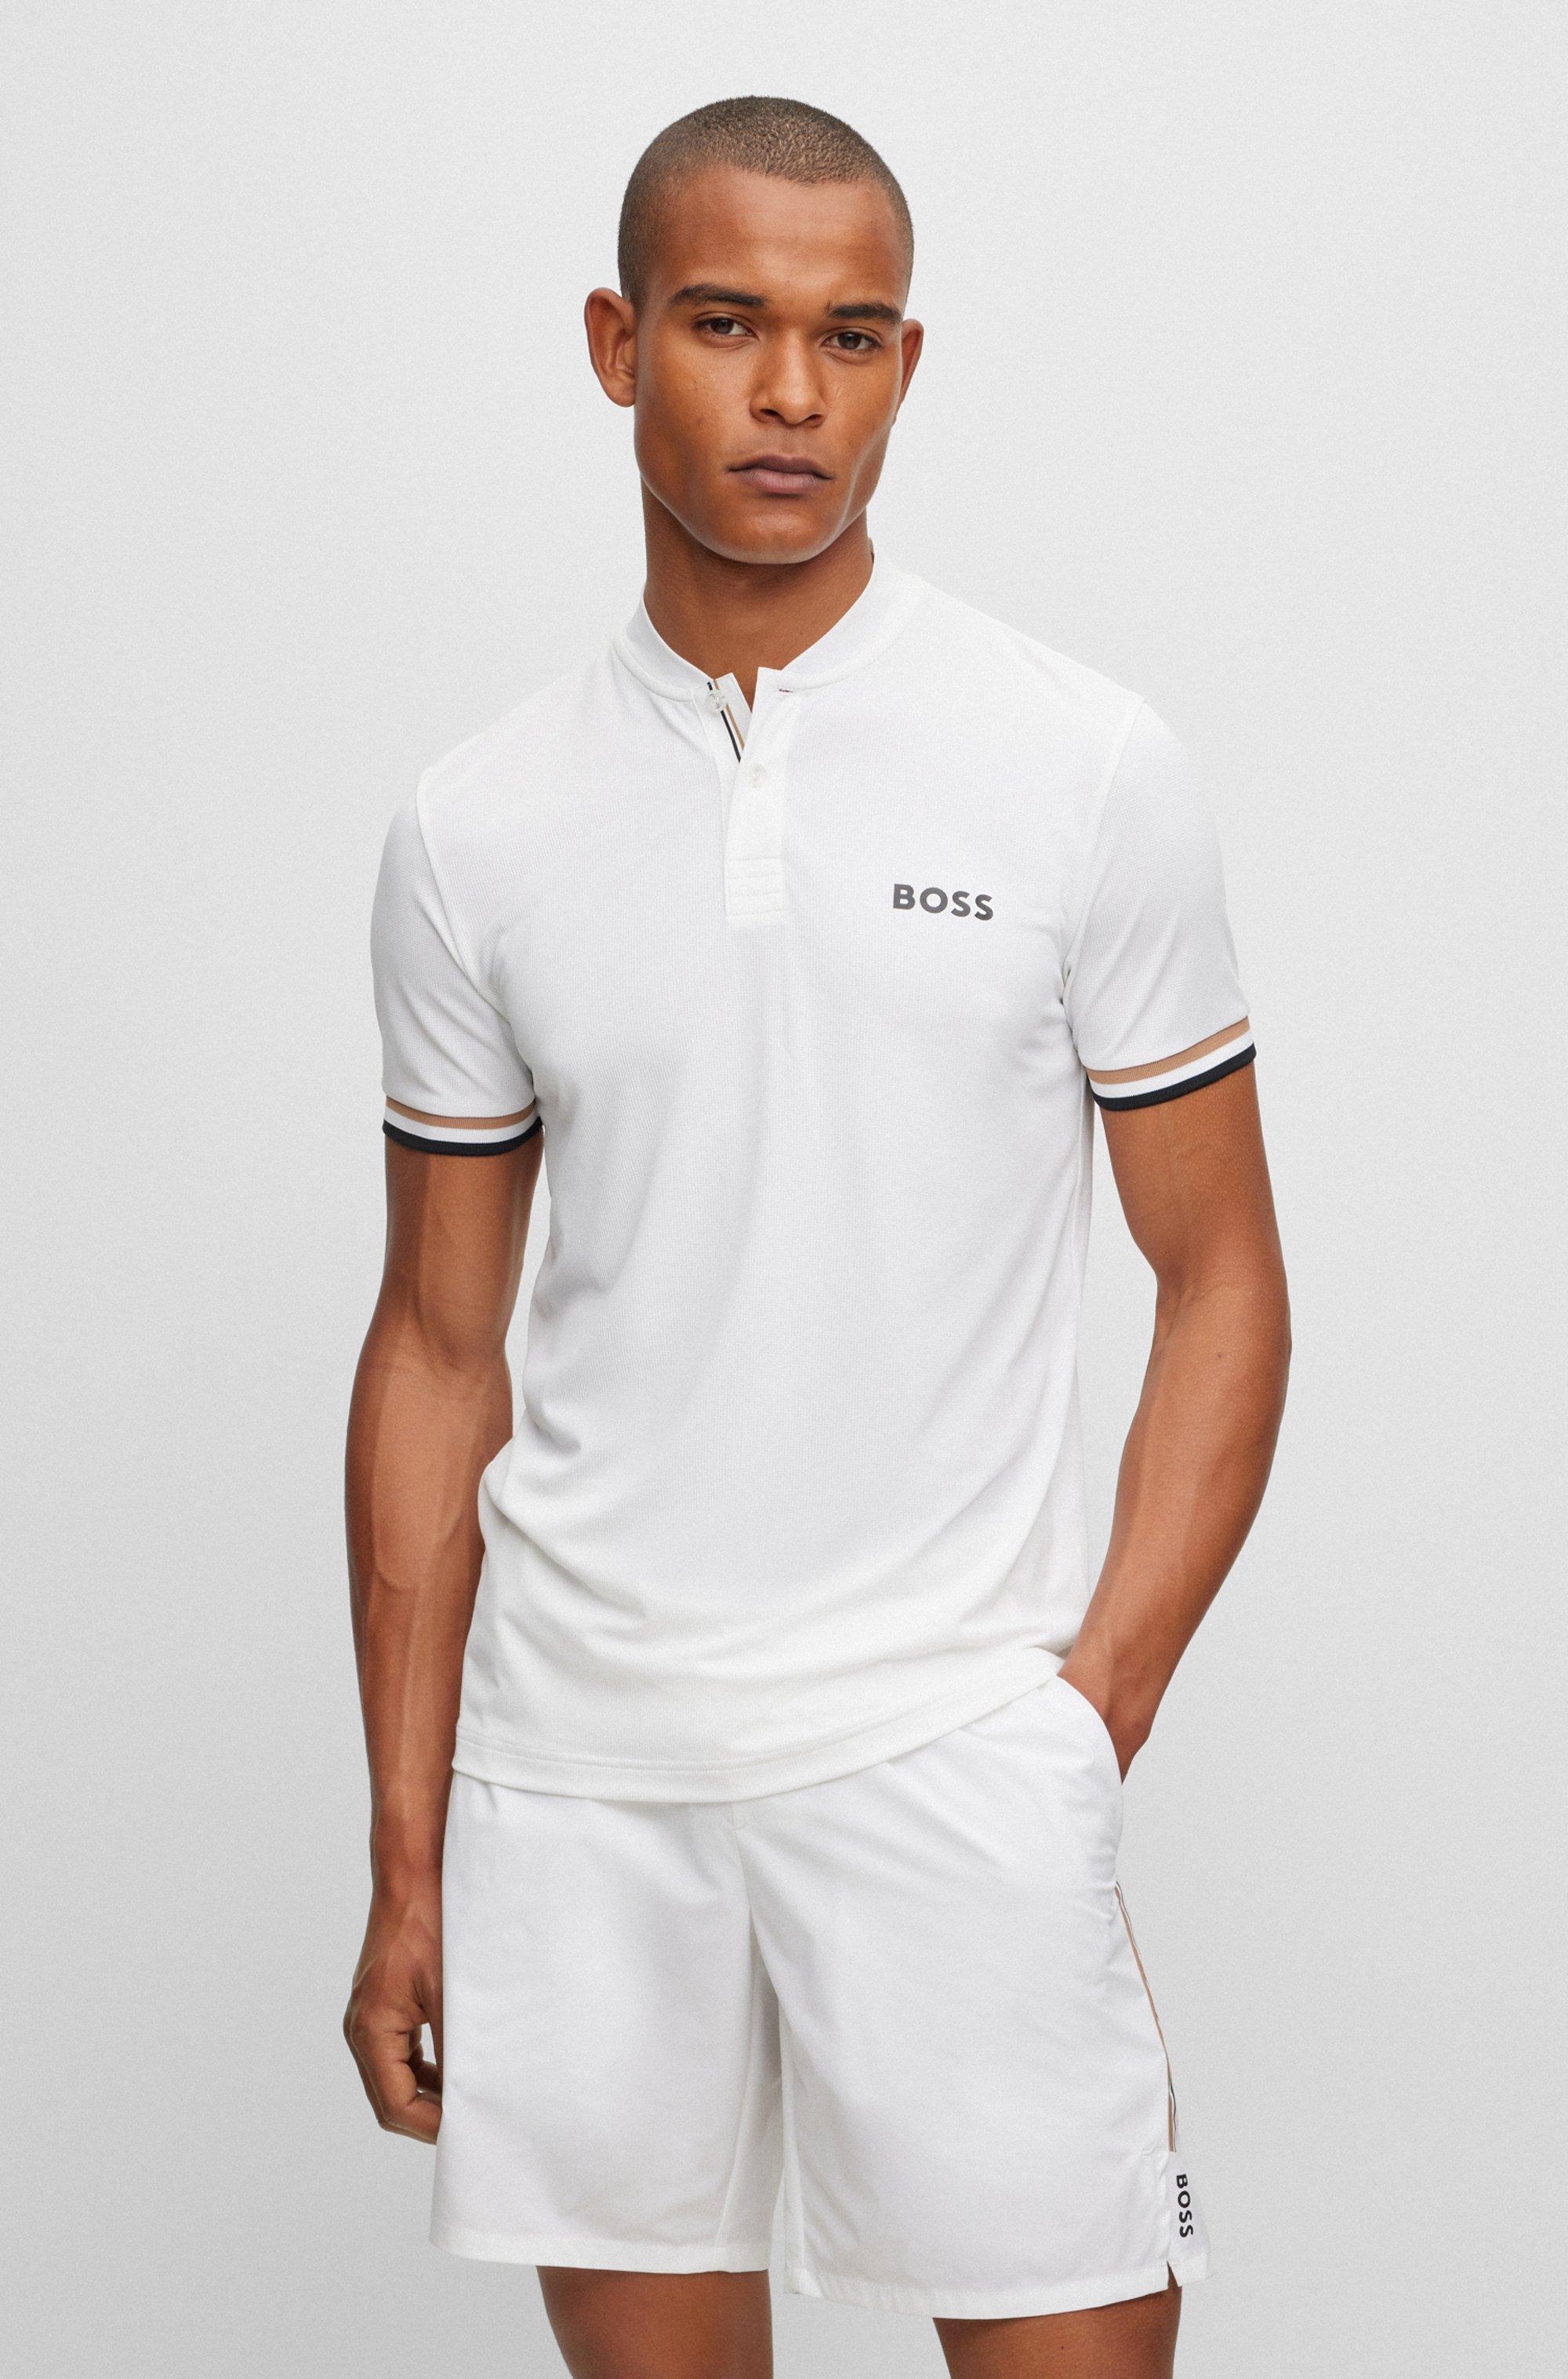 BOSS by HUGO BOSS Boss X Berrettini Slim-fit Polo Shirt With Stripes in White for Men | Lyst